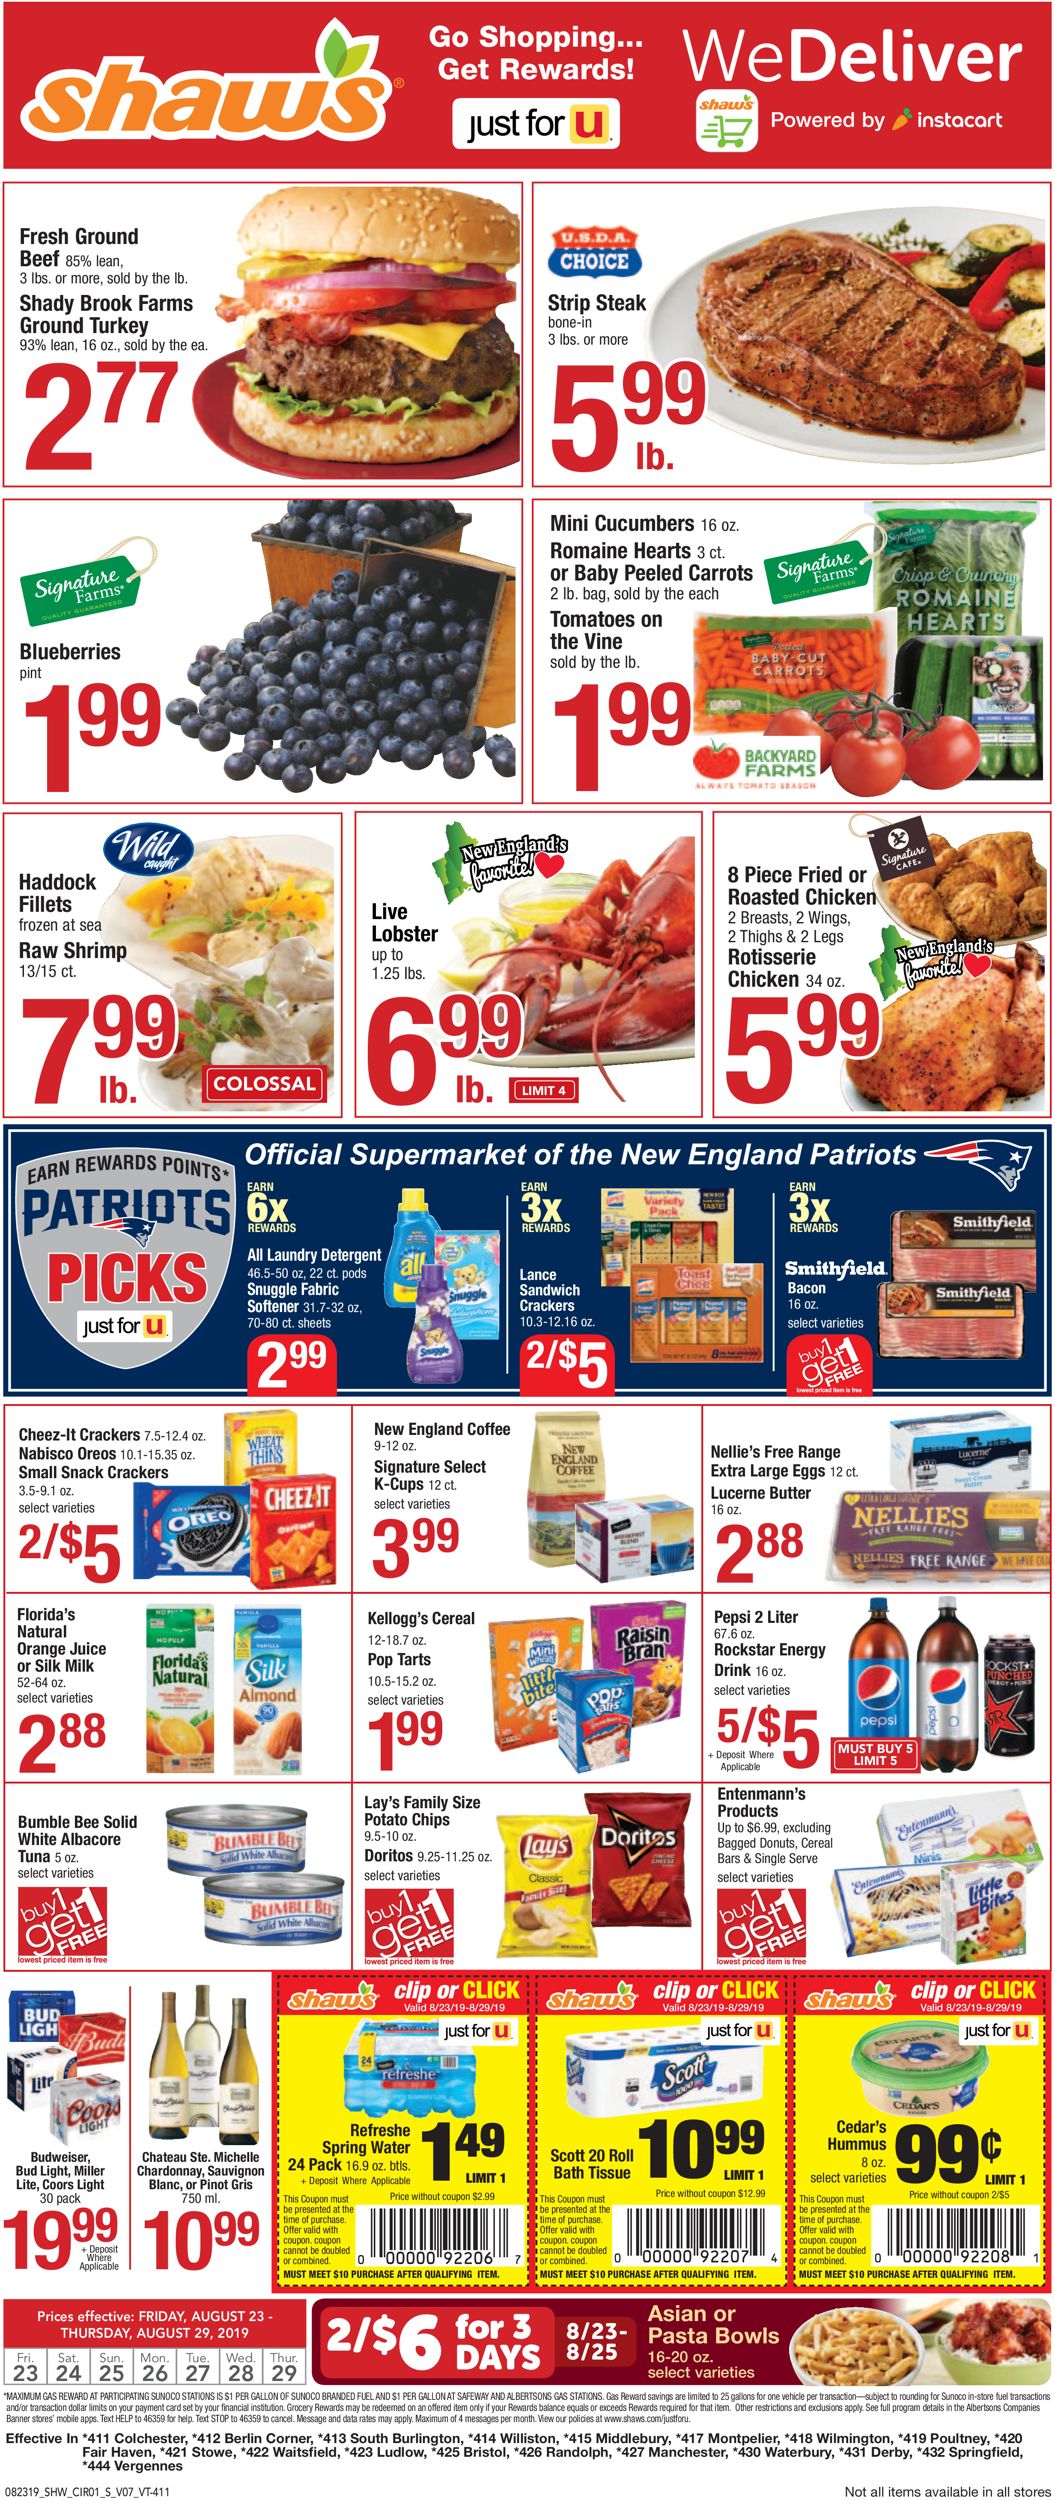 Shaw’s Current weekly ad 08/23 - 08/29/2019 - frequent-ads.com